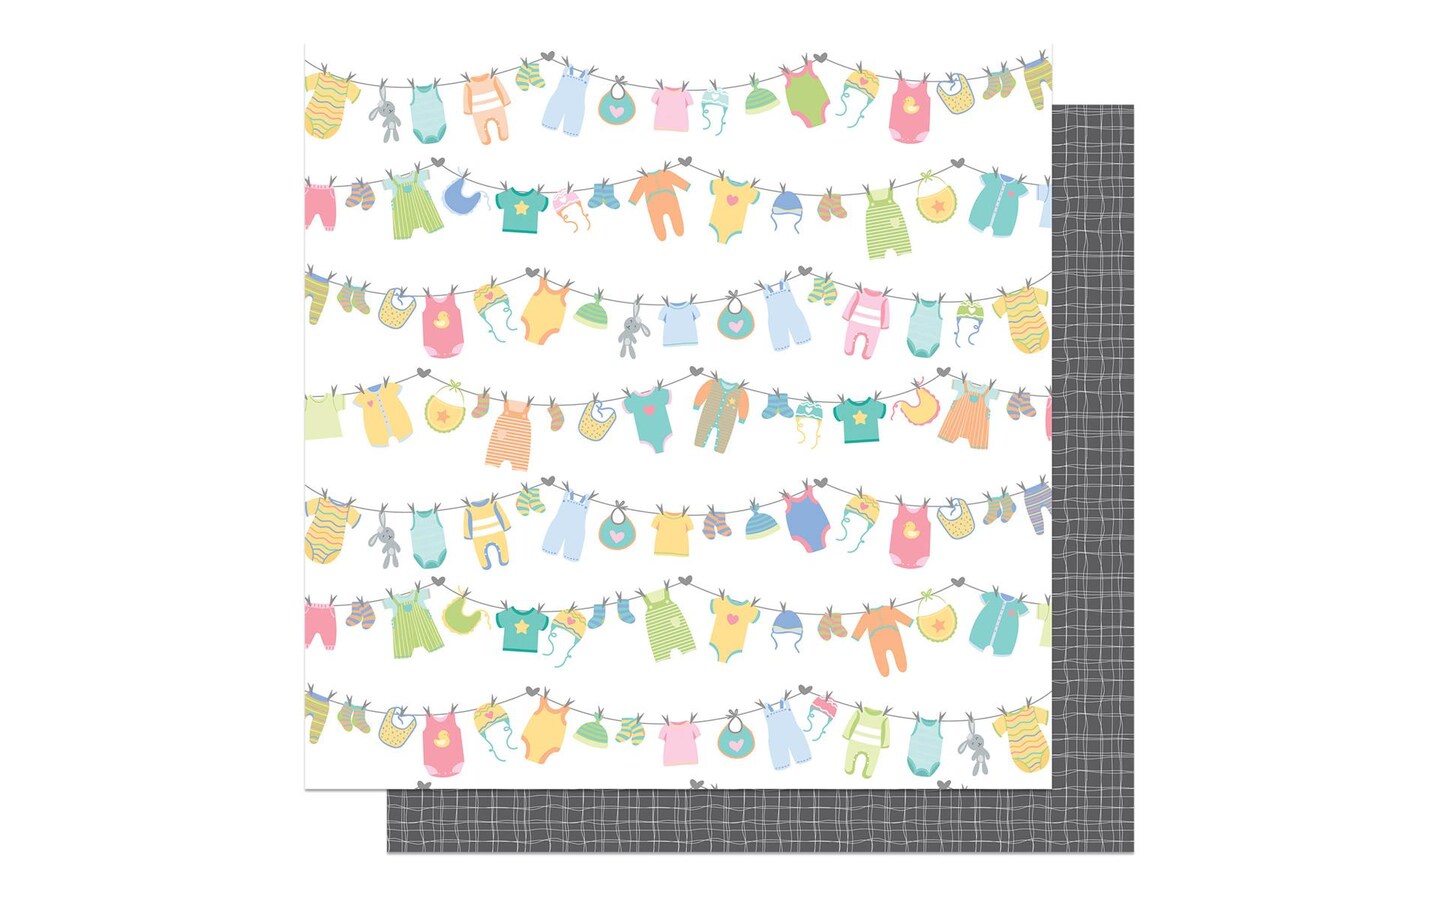 Photo Play Paper, Hush Little Baby